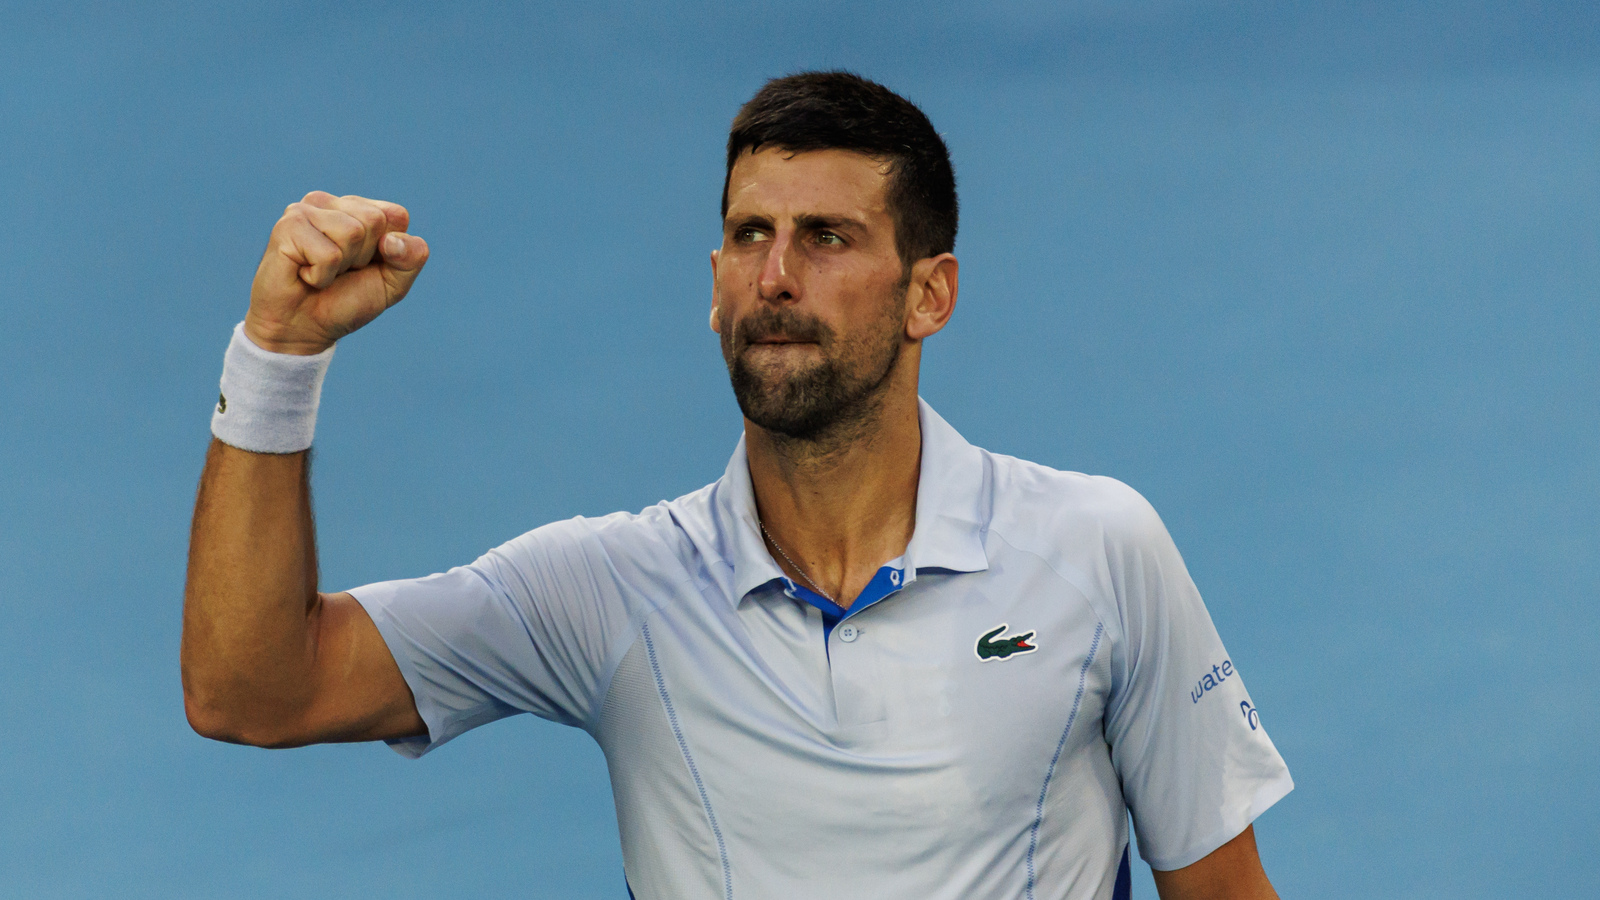 Novak Djokovic teases a 'young' Rohan Bopanna on his new ranking feat, from one World No. 1 to another